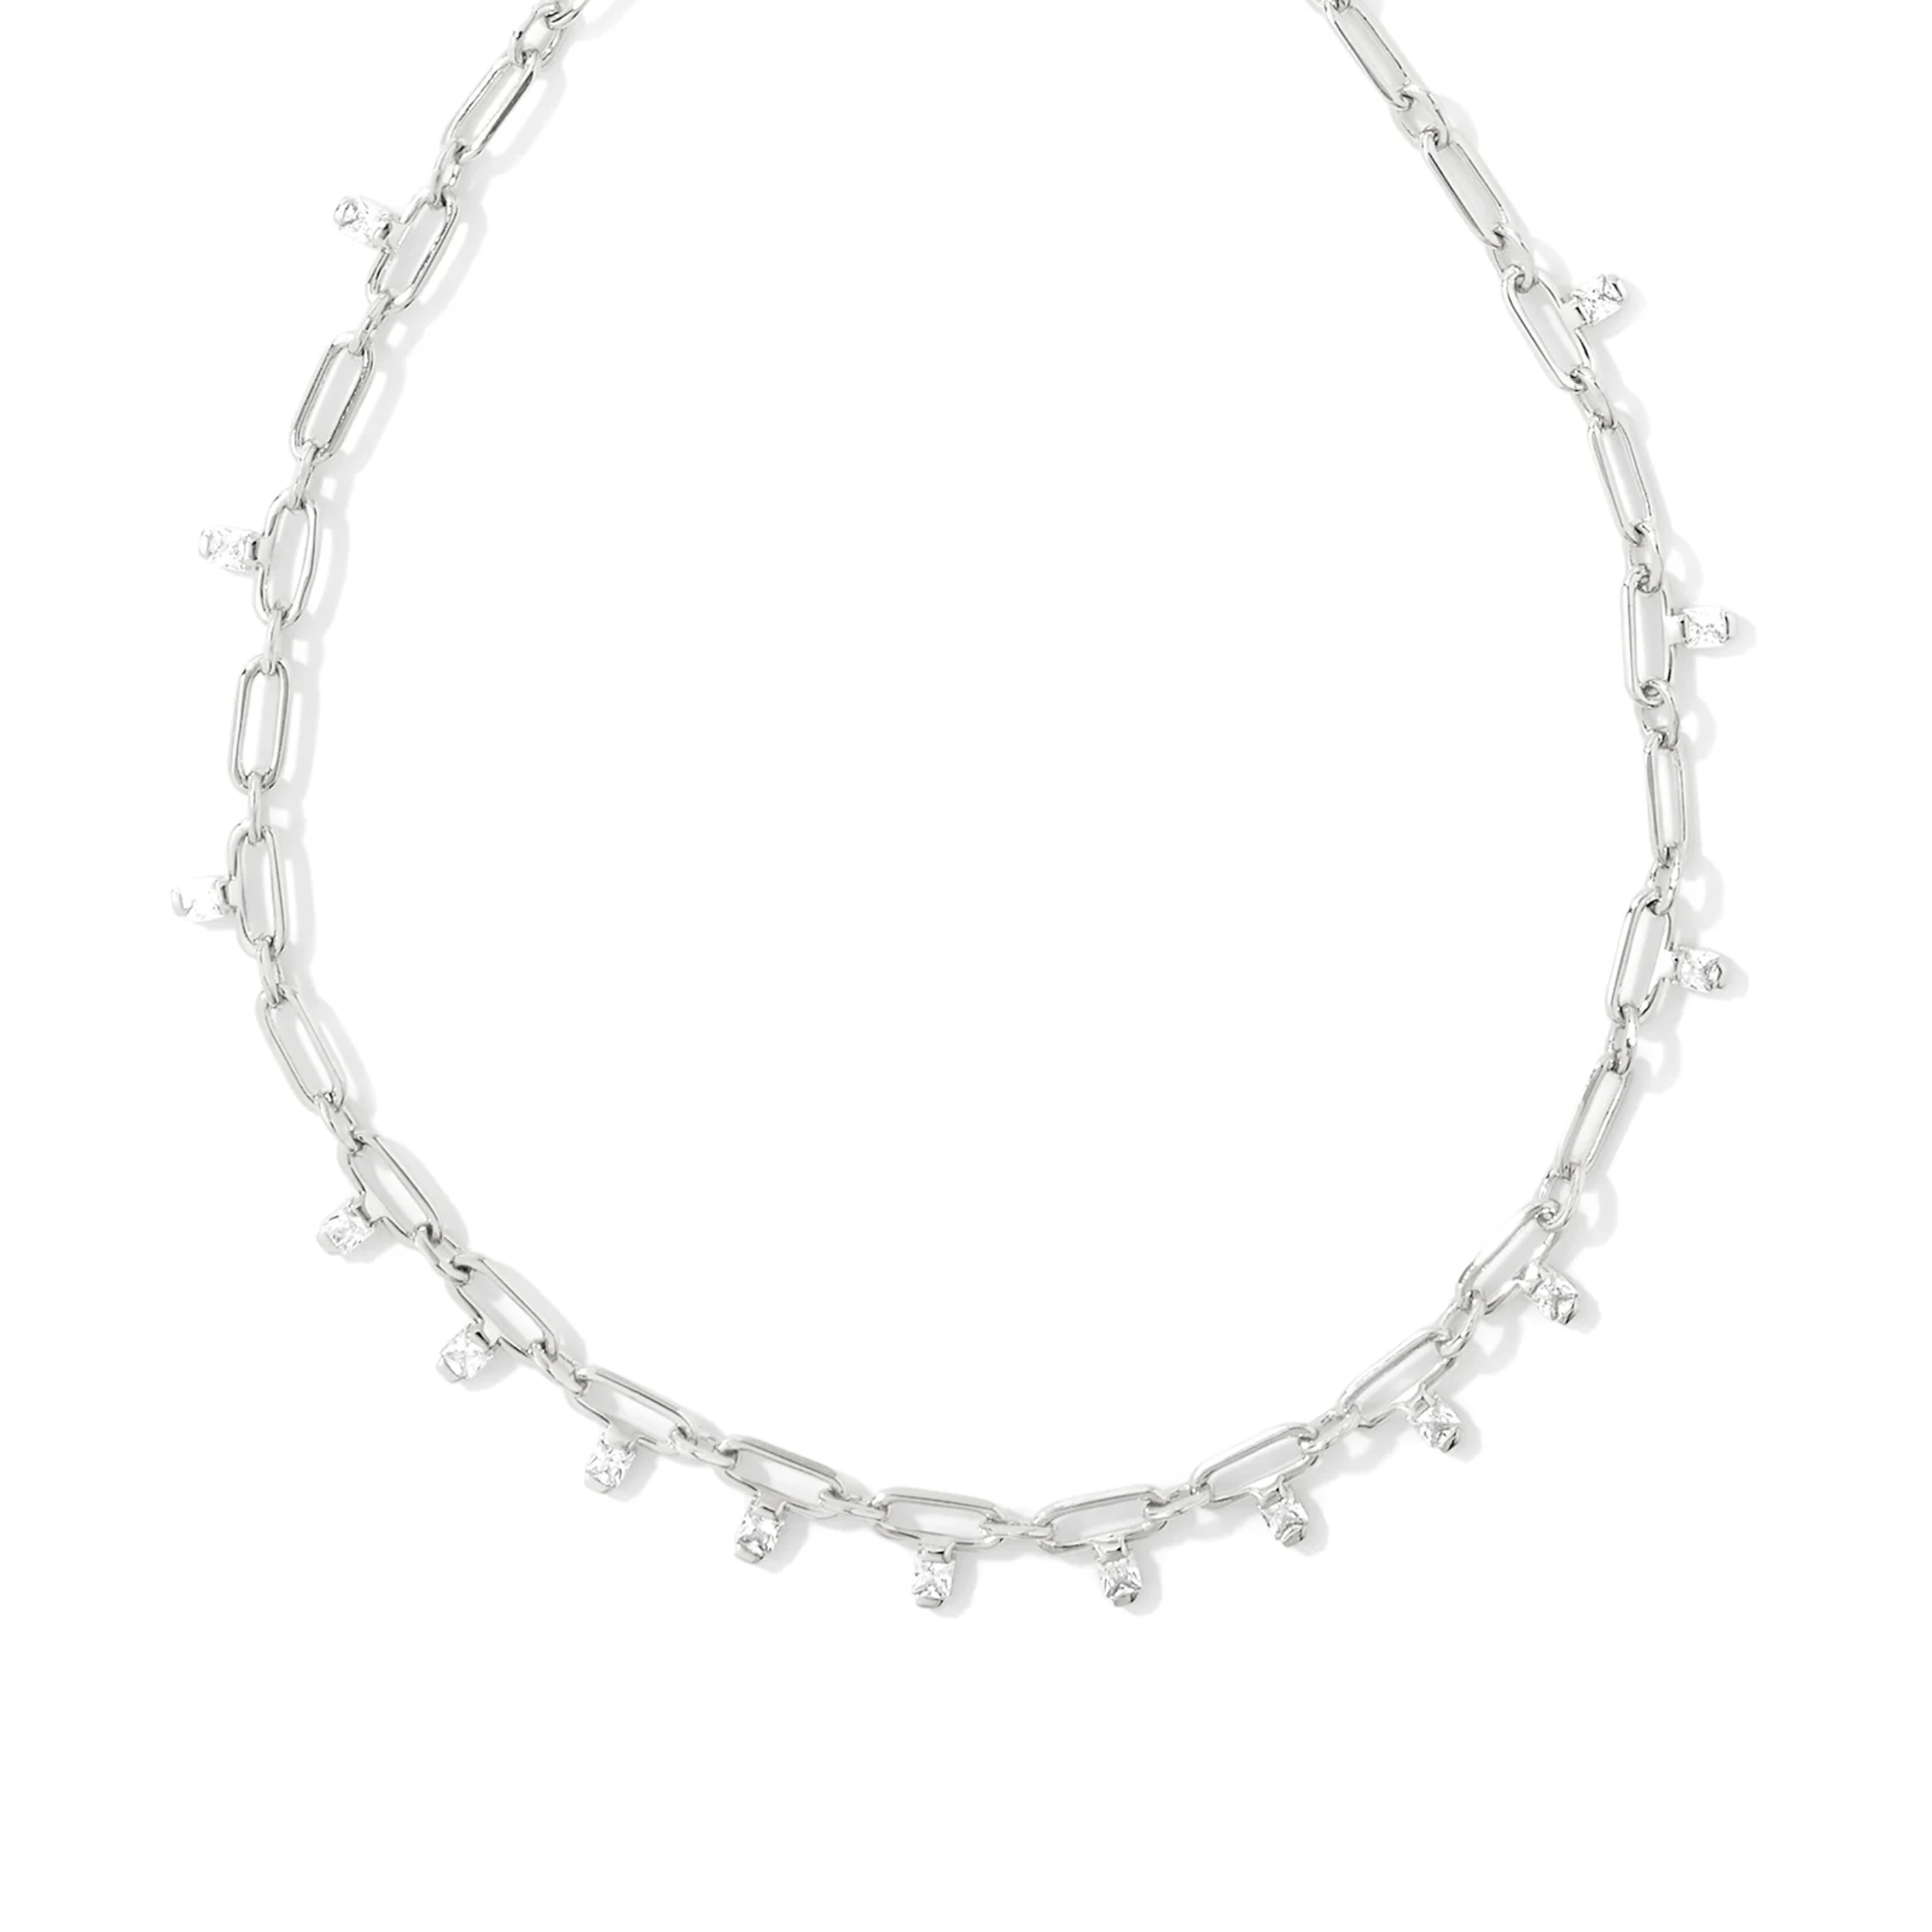 Kendra Scott | Lindy Silver Crystal Chain Necklace in White Crystal - Giddy Up Glamour Boutique